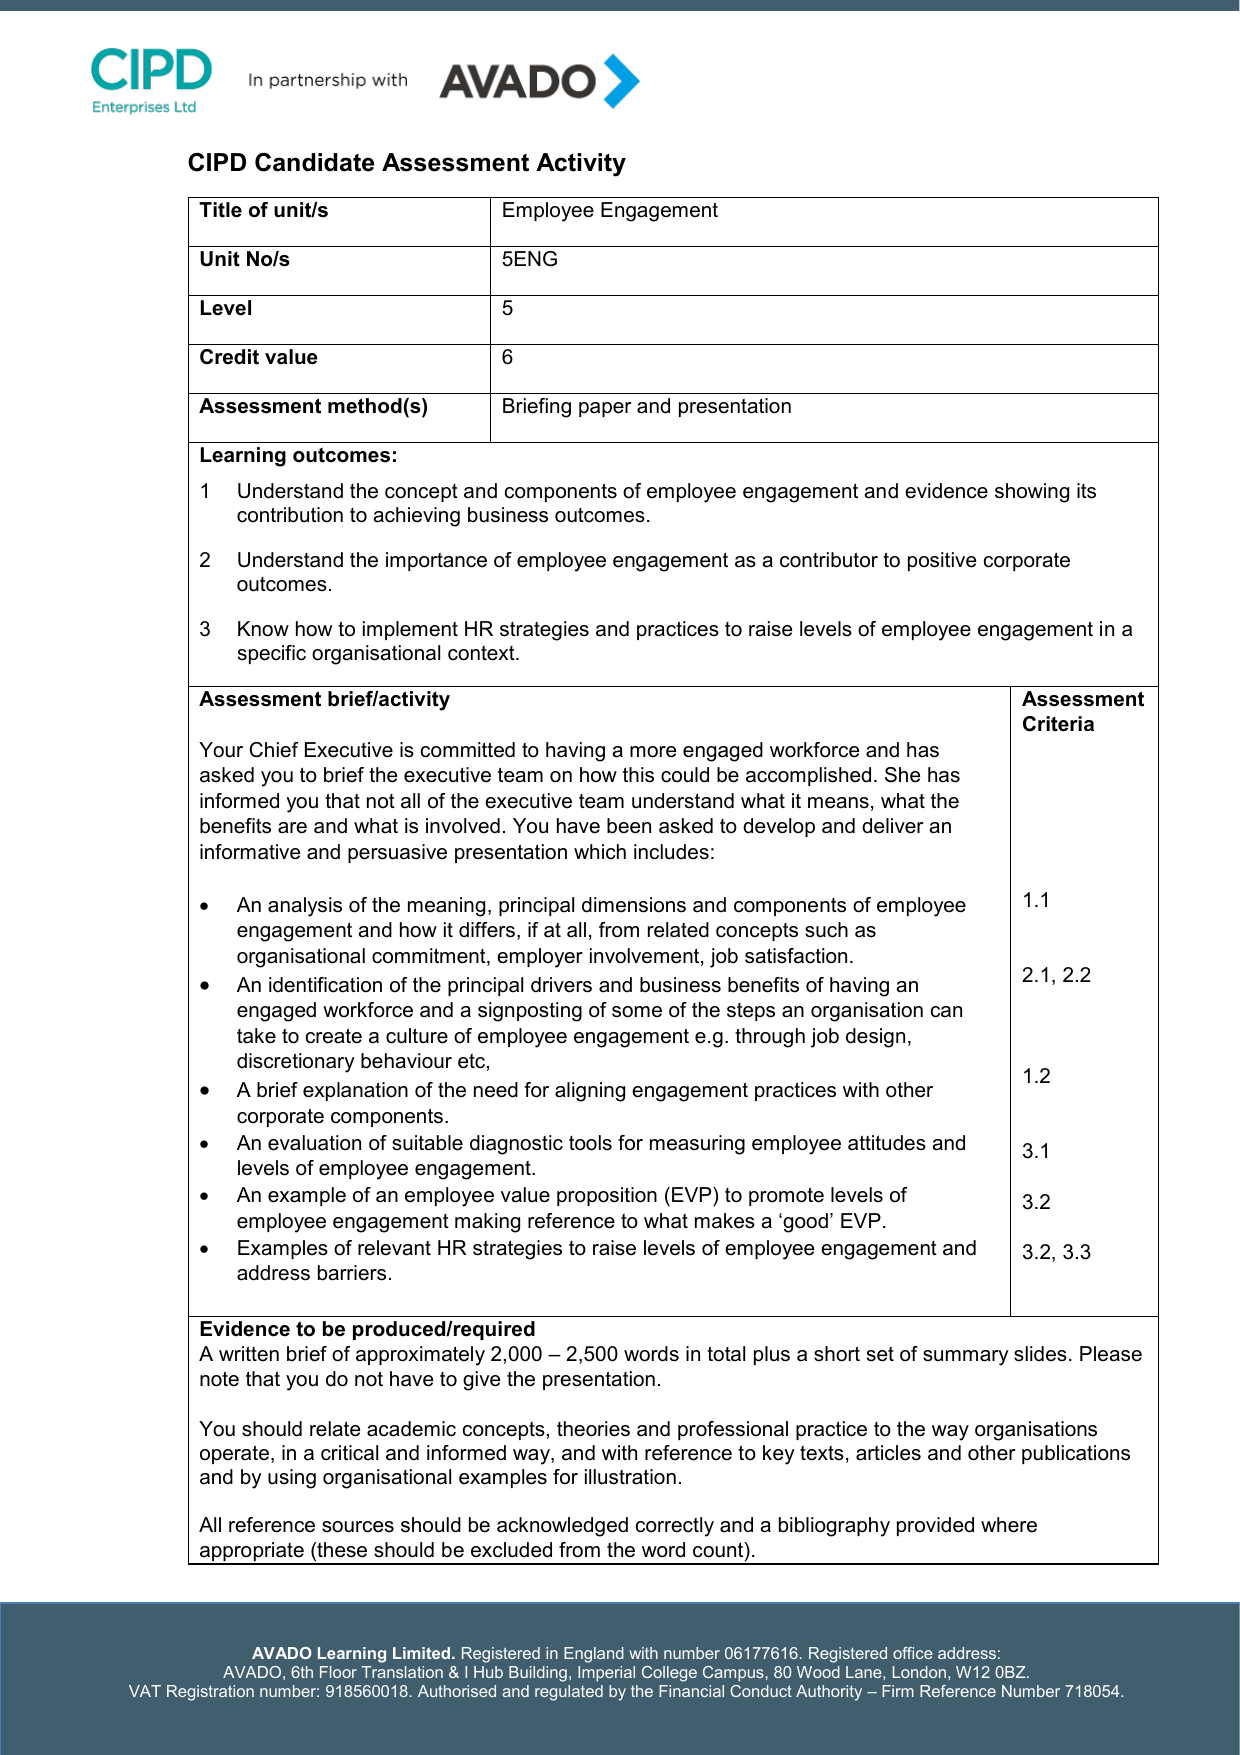 cipd level 5 assignment examples 5co03